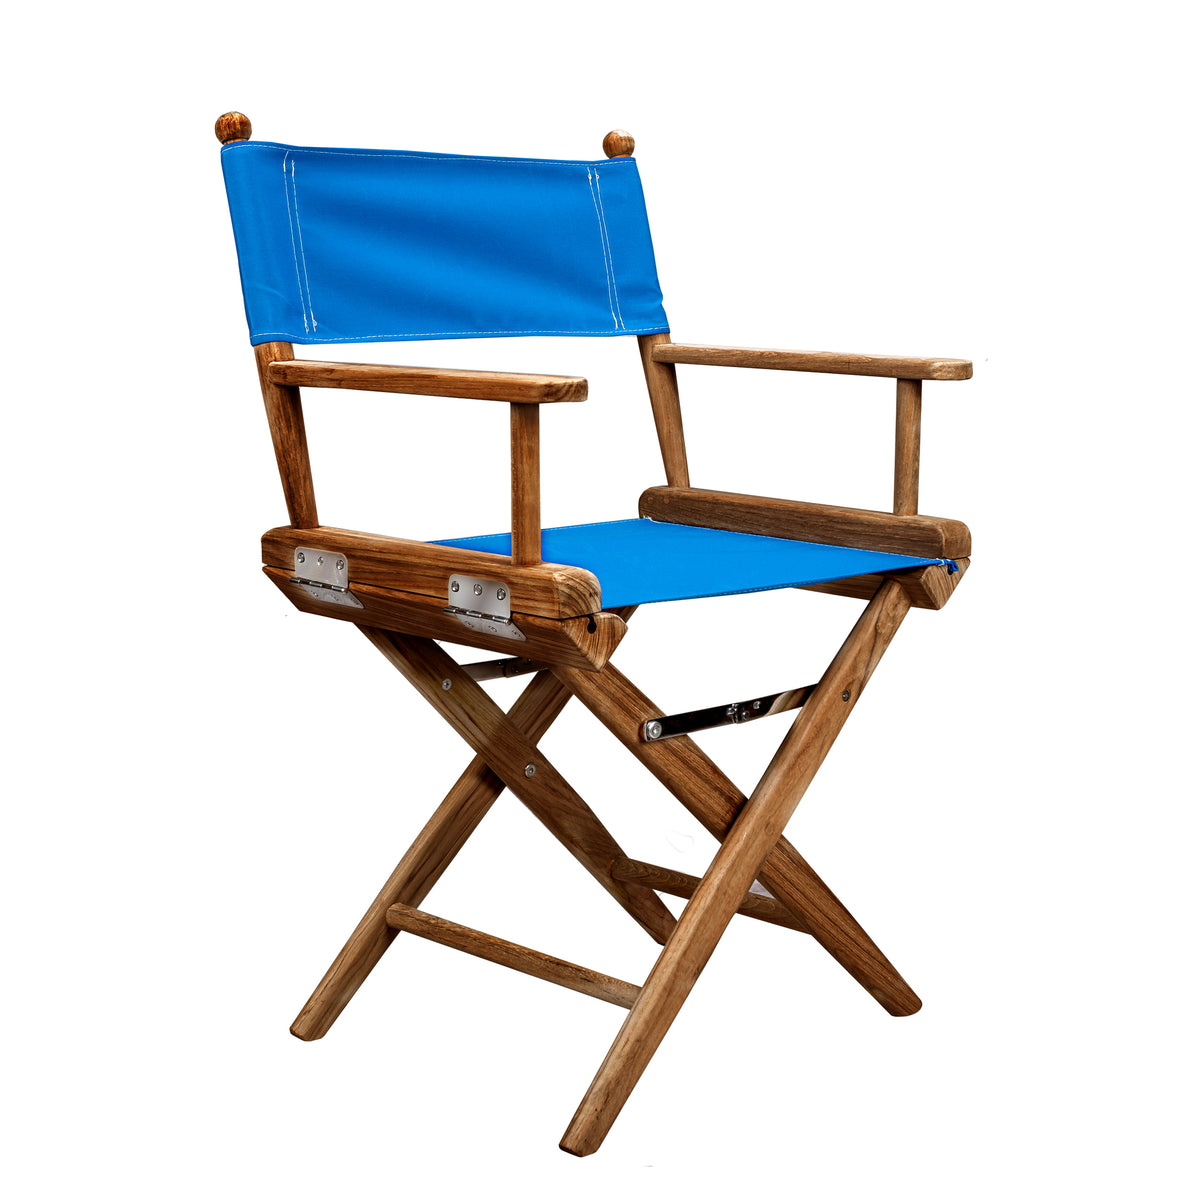 Directors Chair With Pacific Blue SUNBRELLA® Fabric Covers - Oiled Finish - 60041